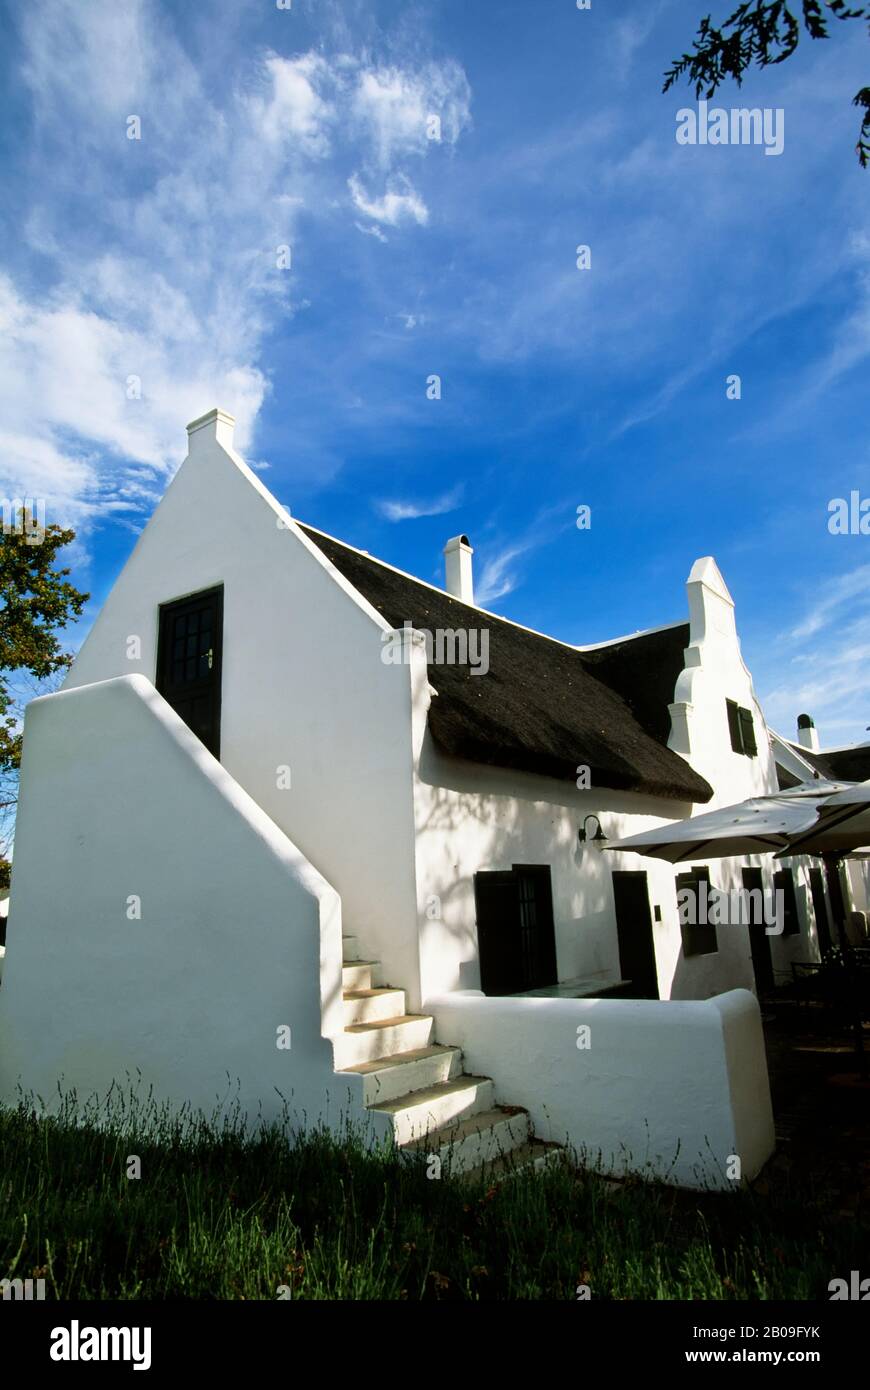 SOUTH AFRICA, NEAR CAPE TOWN, STELLENBOSCH WINE COUNTRY, SPIER ESTATE, DUTCH COLONIAL ARCHITECTURE Stock Photo